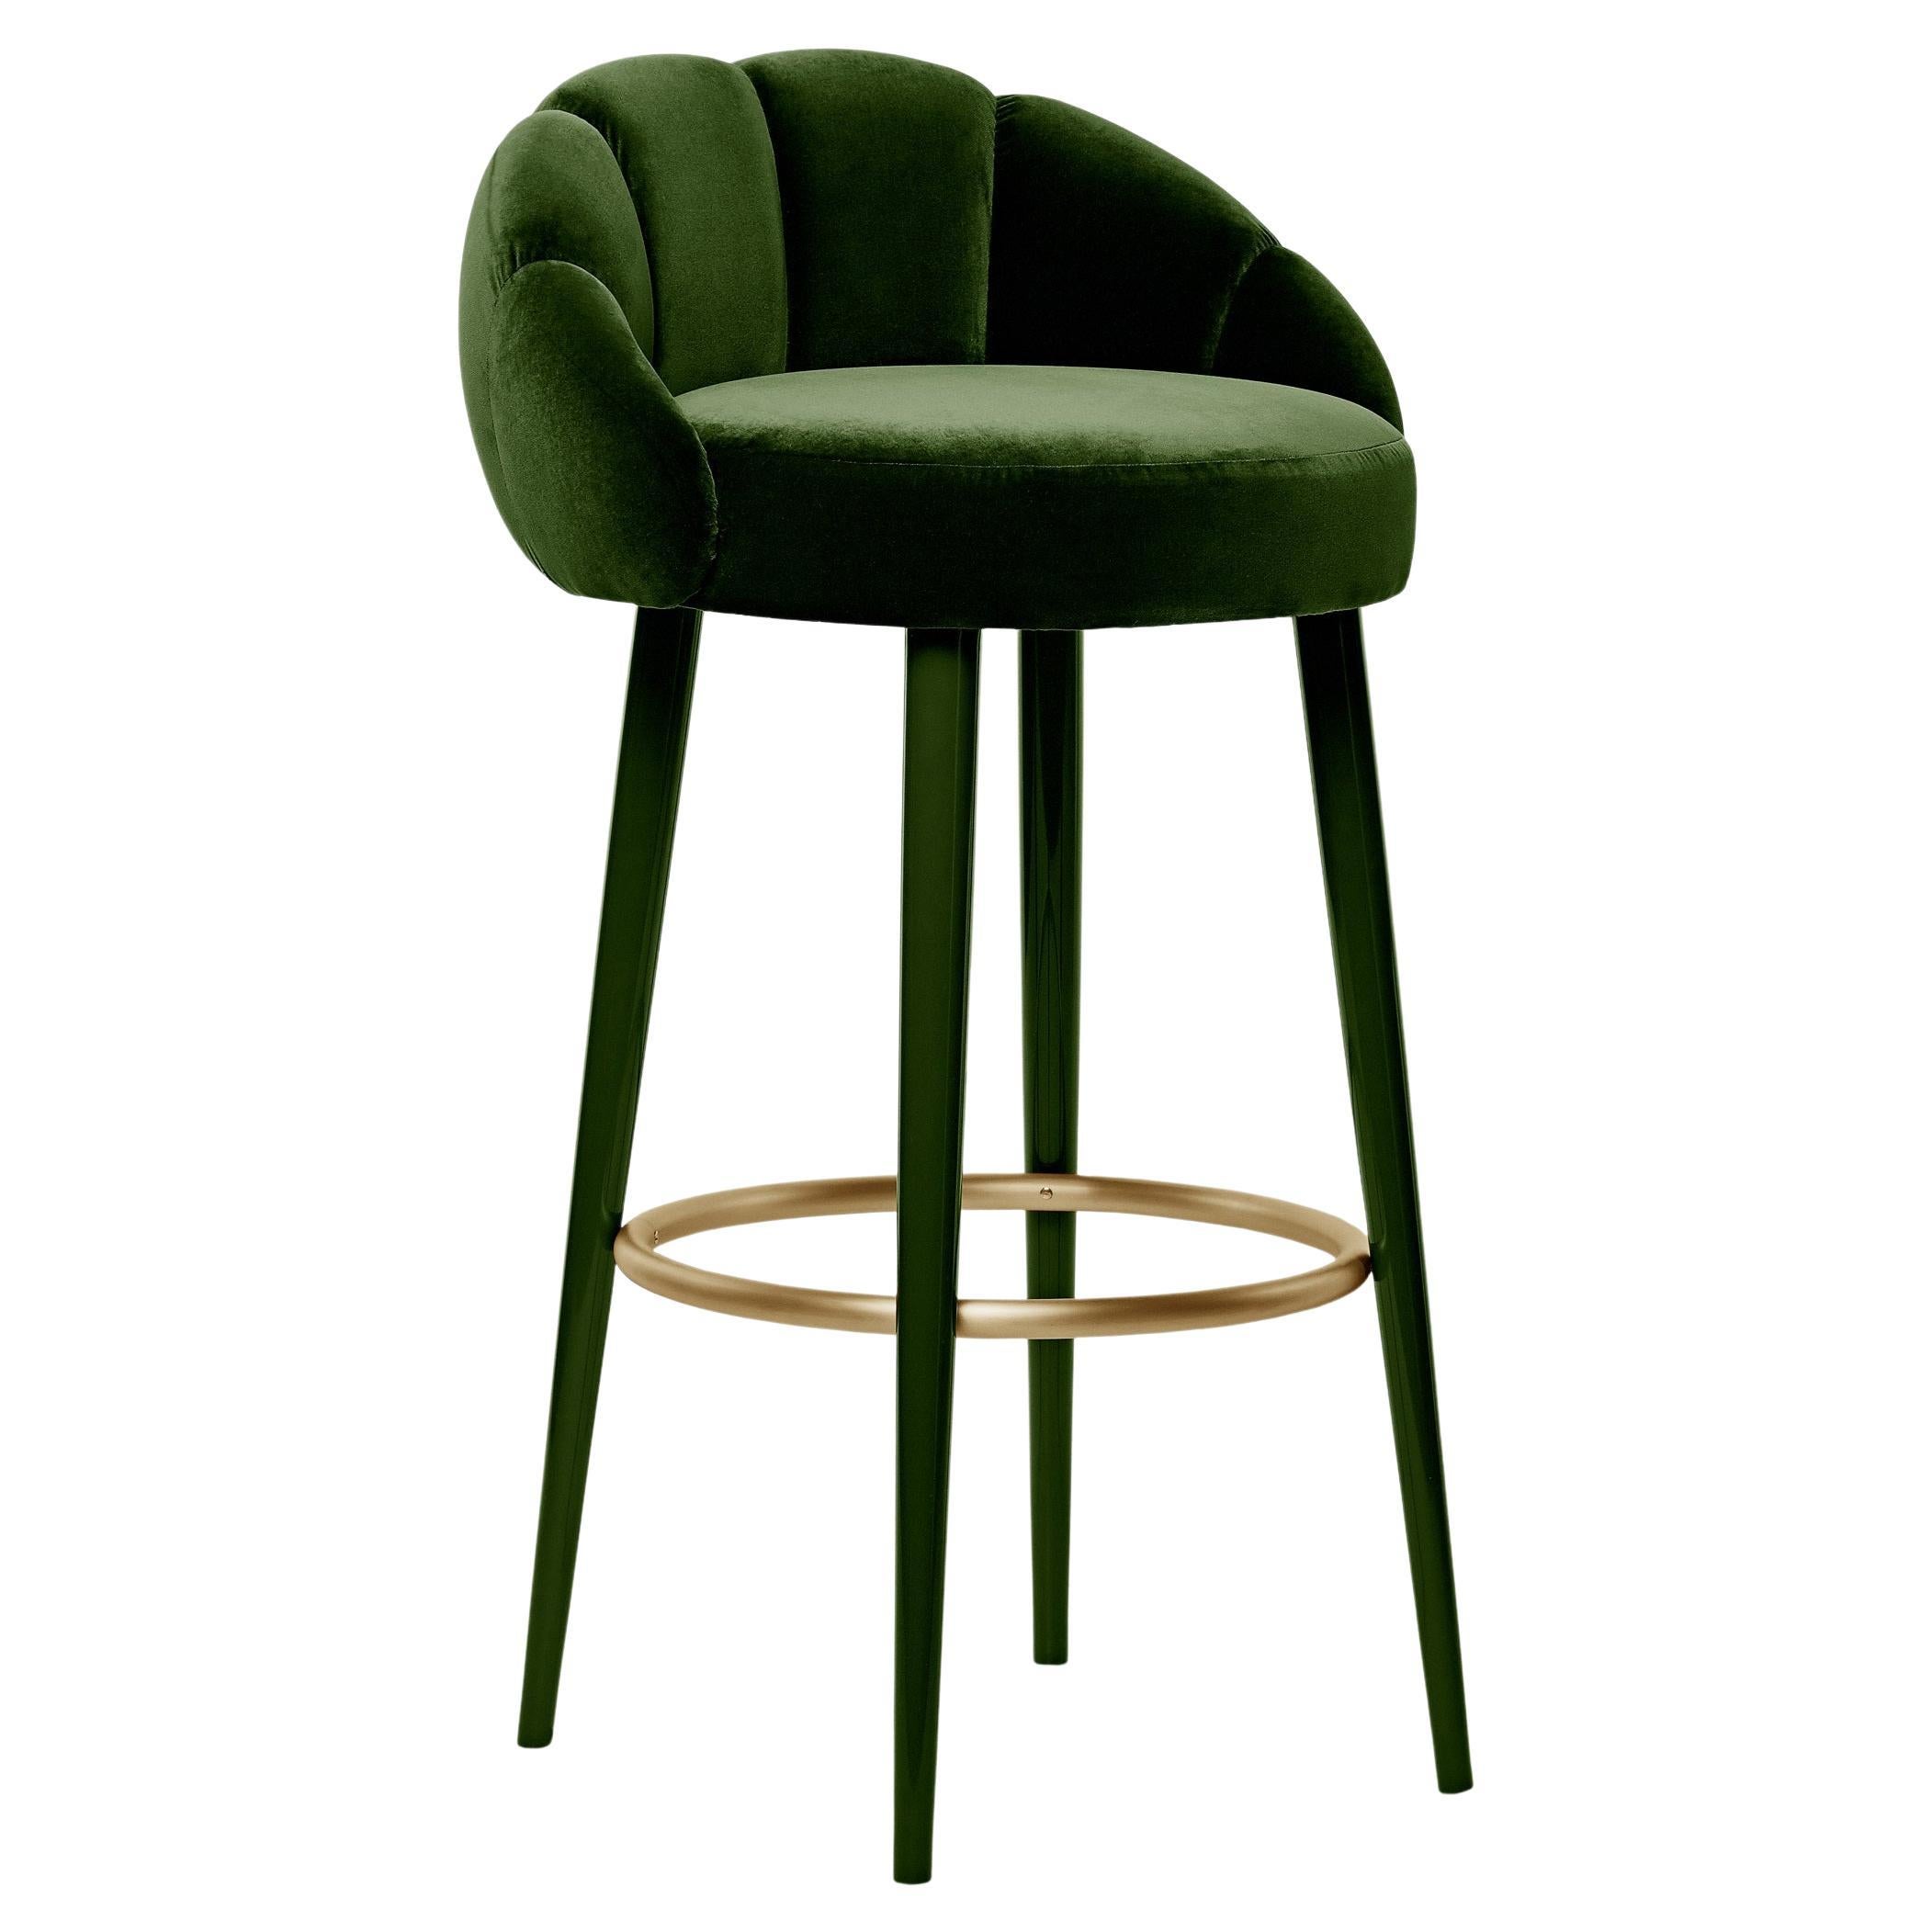 Contemporary Barstool with Seaming Details on the Front & Back